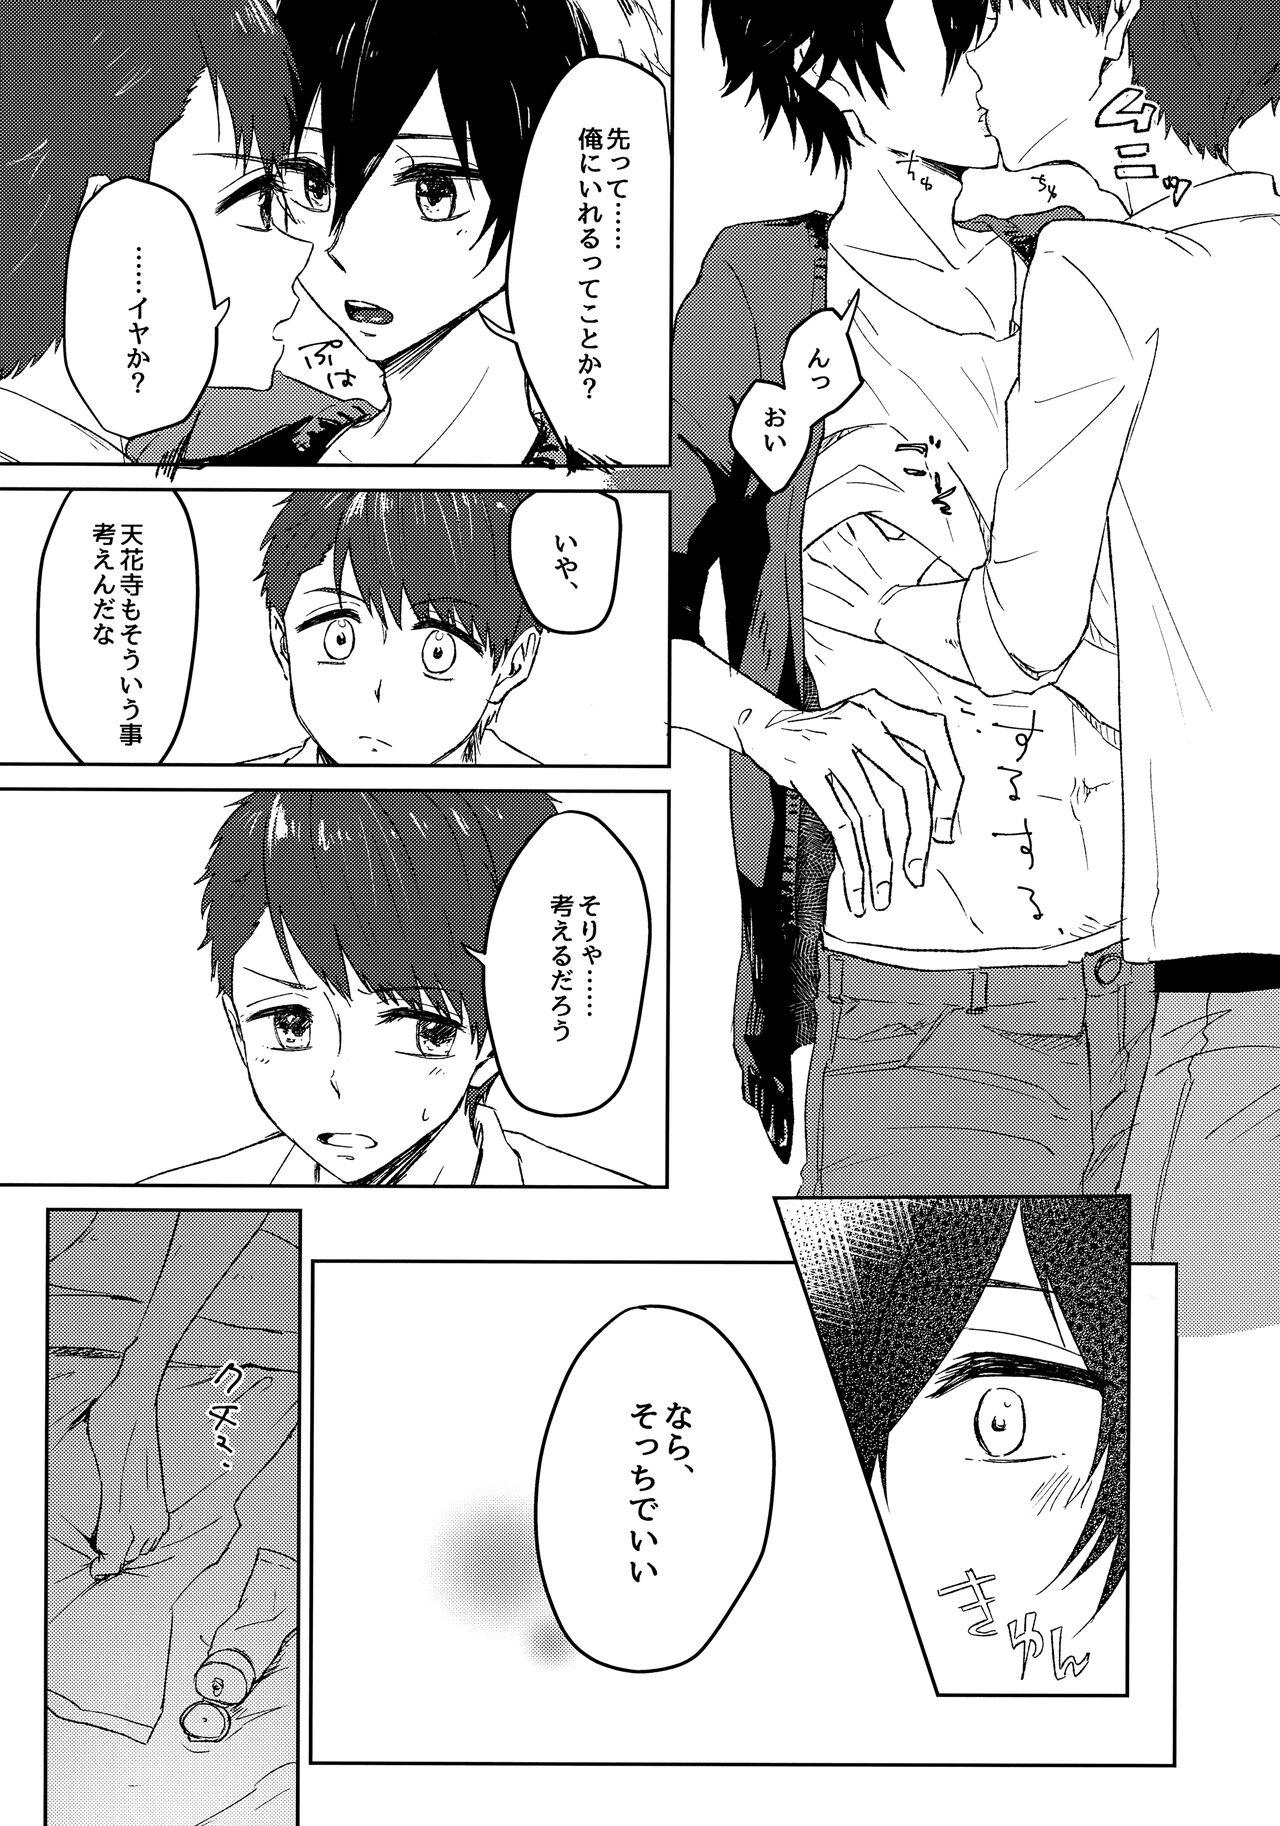 Gays Crescendo - Star-myu Actress - Page 10